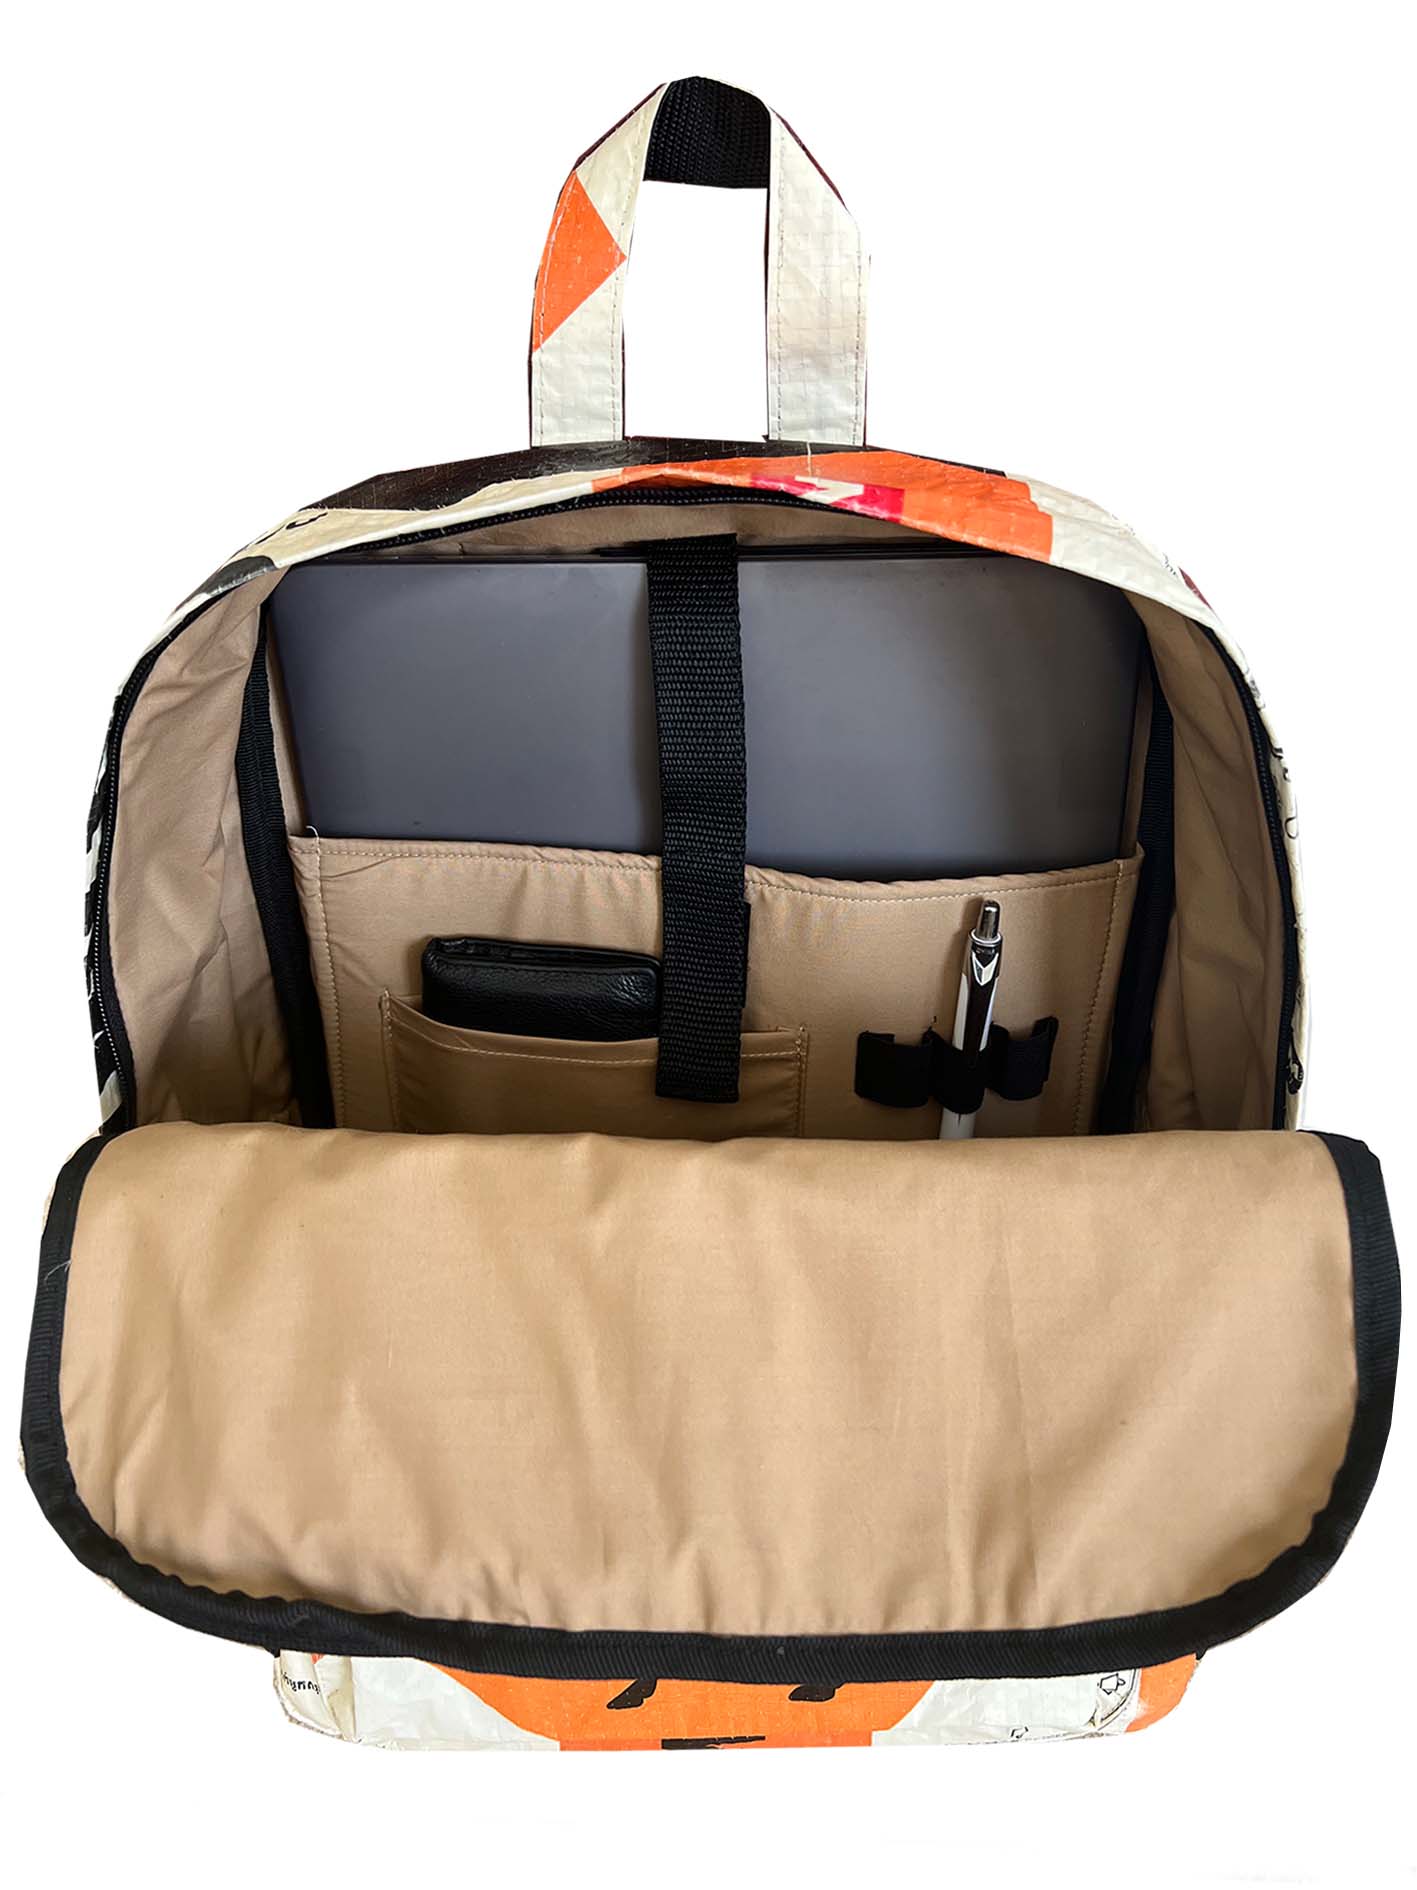 Laptop backpack with car tire tiger